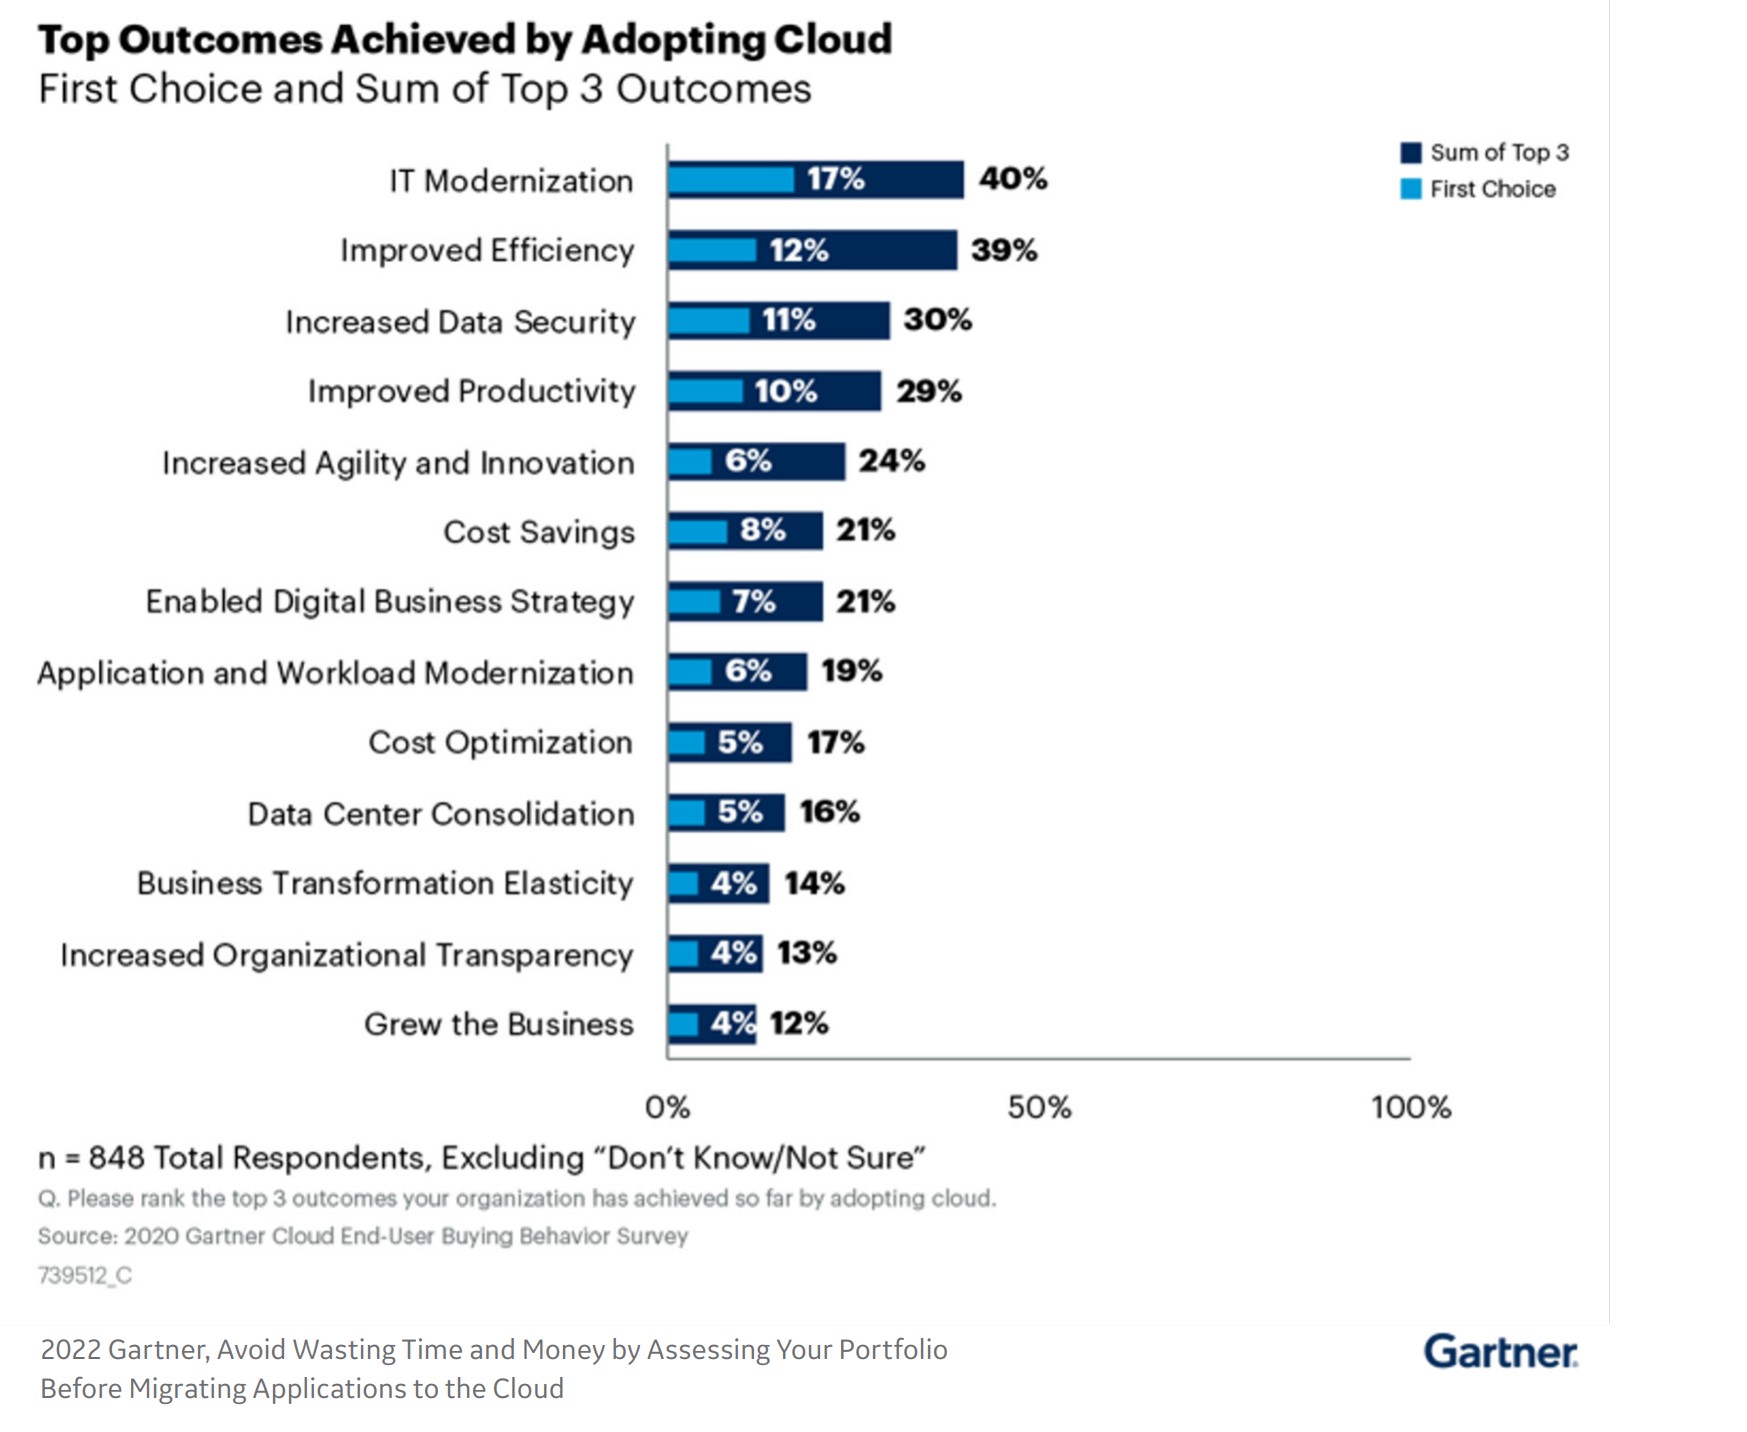 2022 Gartner, Avoid Wasting Time and Money by Assessing Your Portfolio Before Migrating Applications to the Cloud